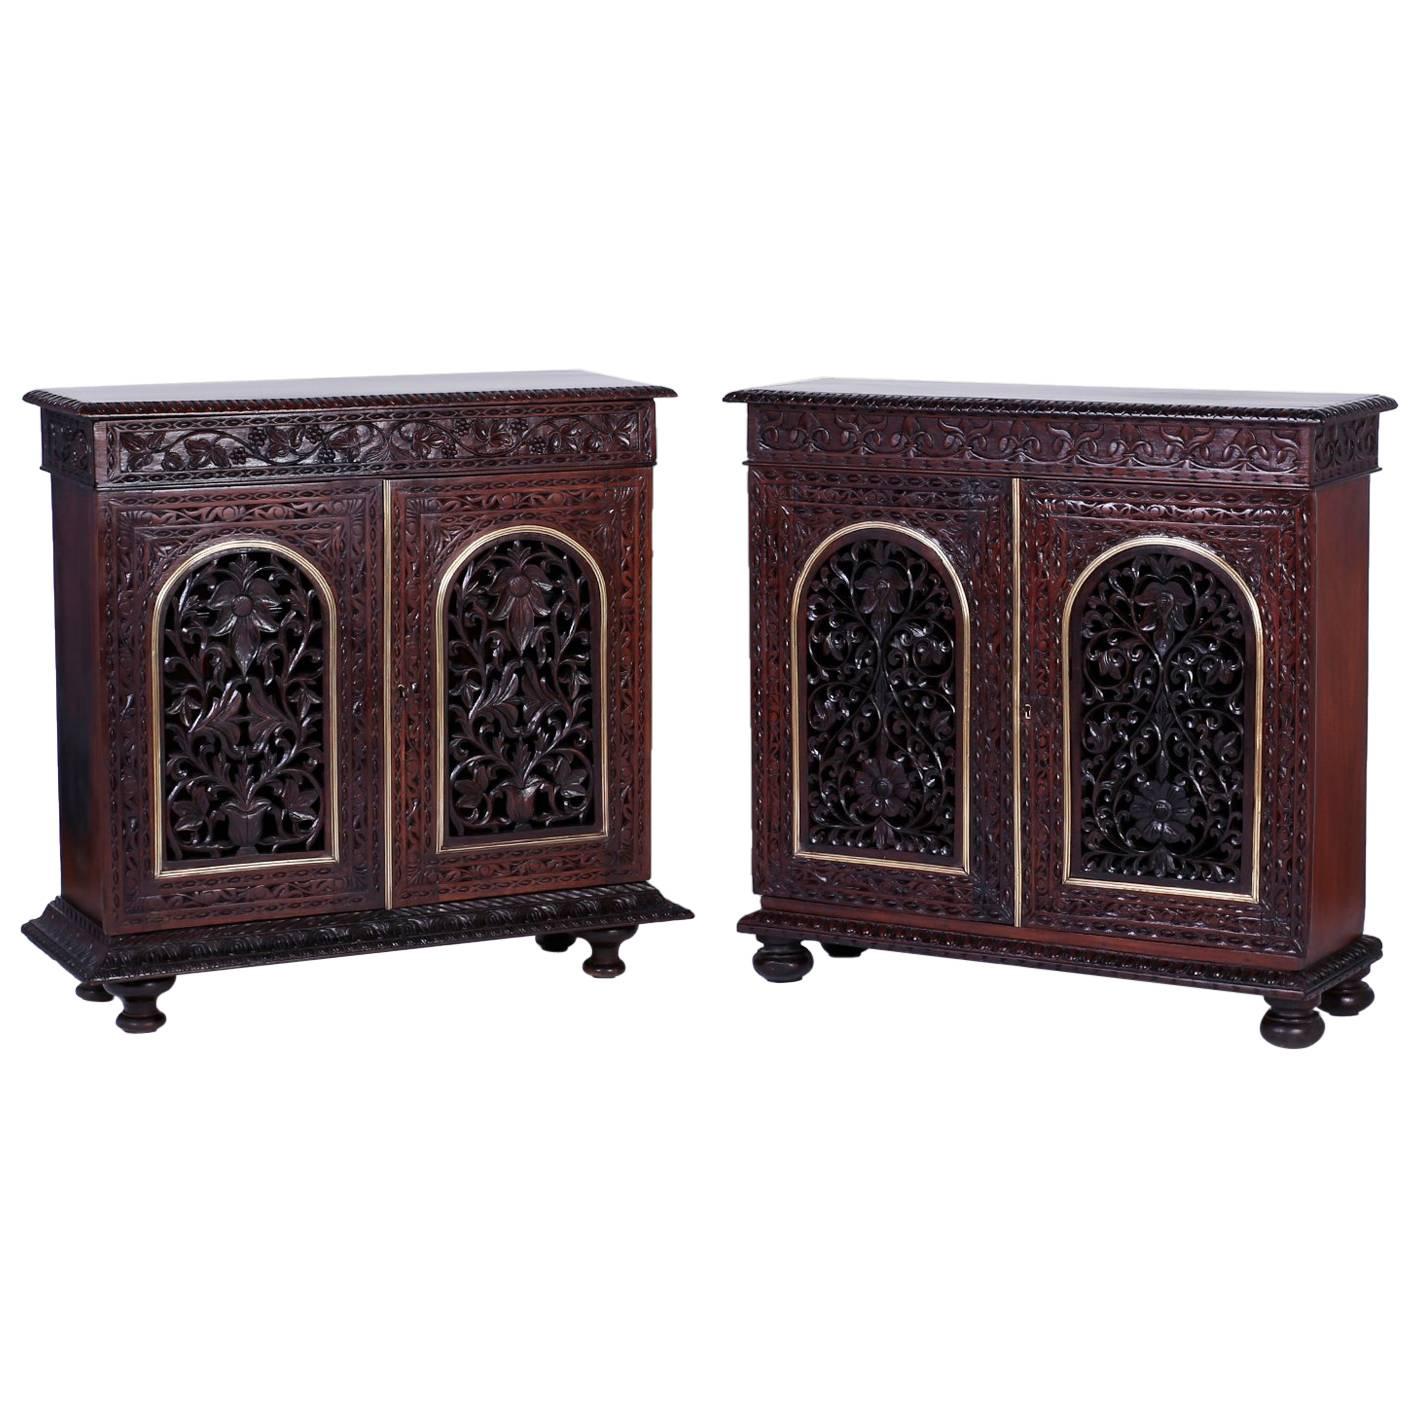 Two Antique Carved Anglo-Indian Cabinets